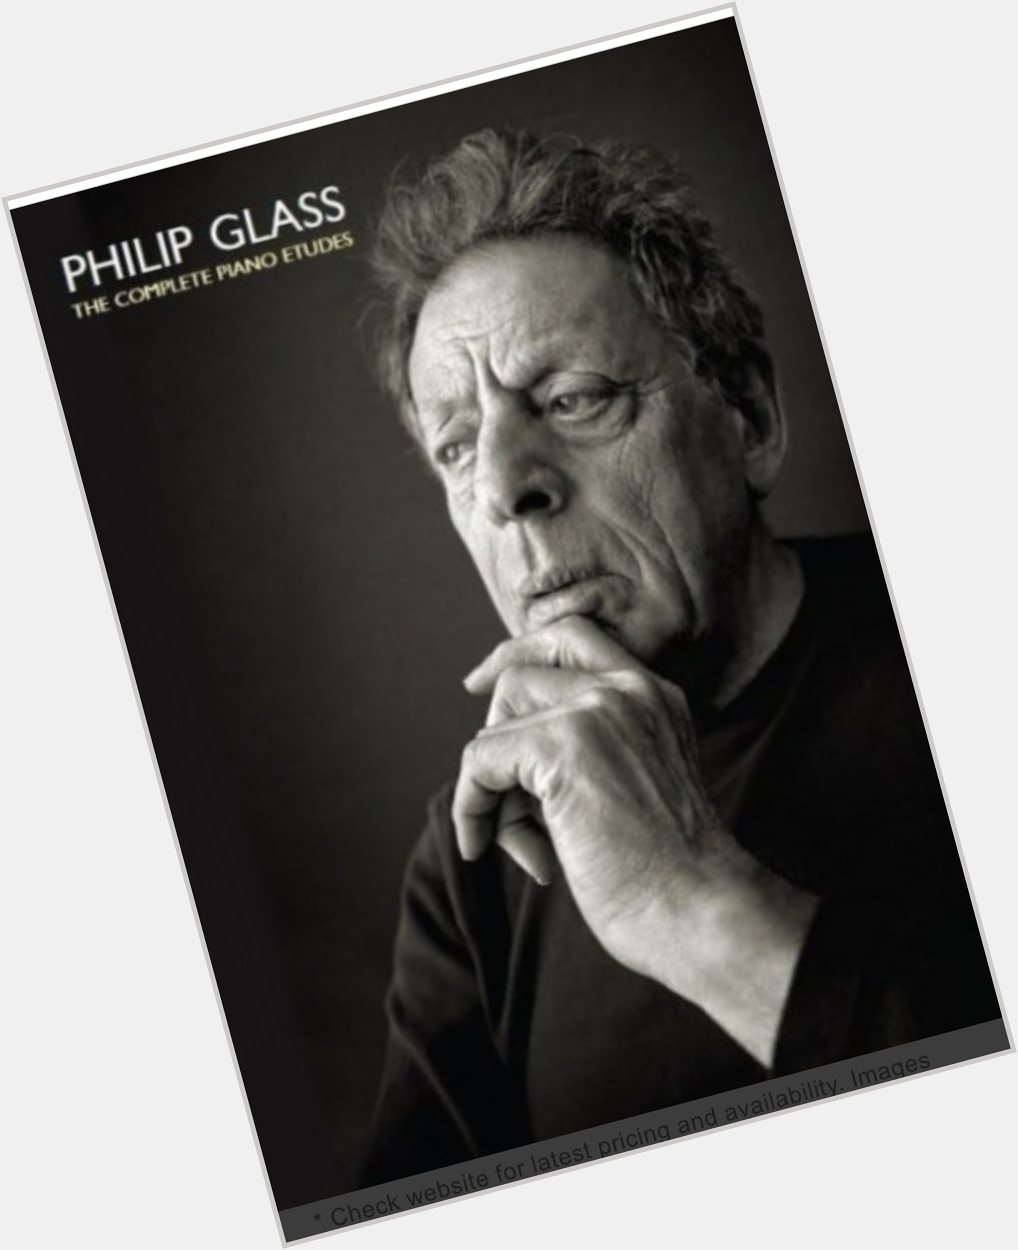 Happy birthday Philip Glass. The one and only. 